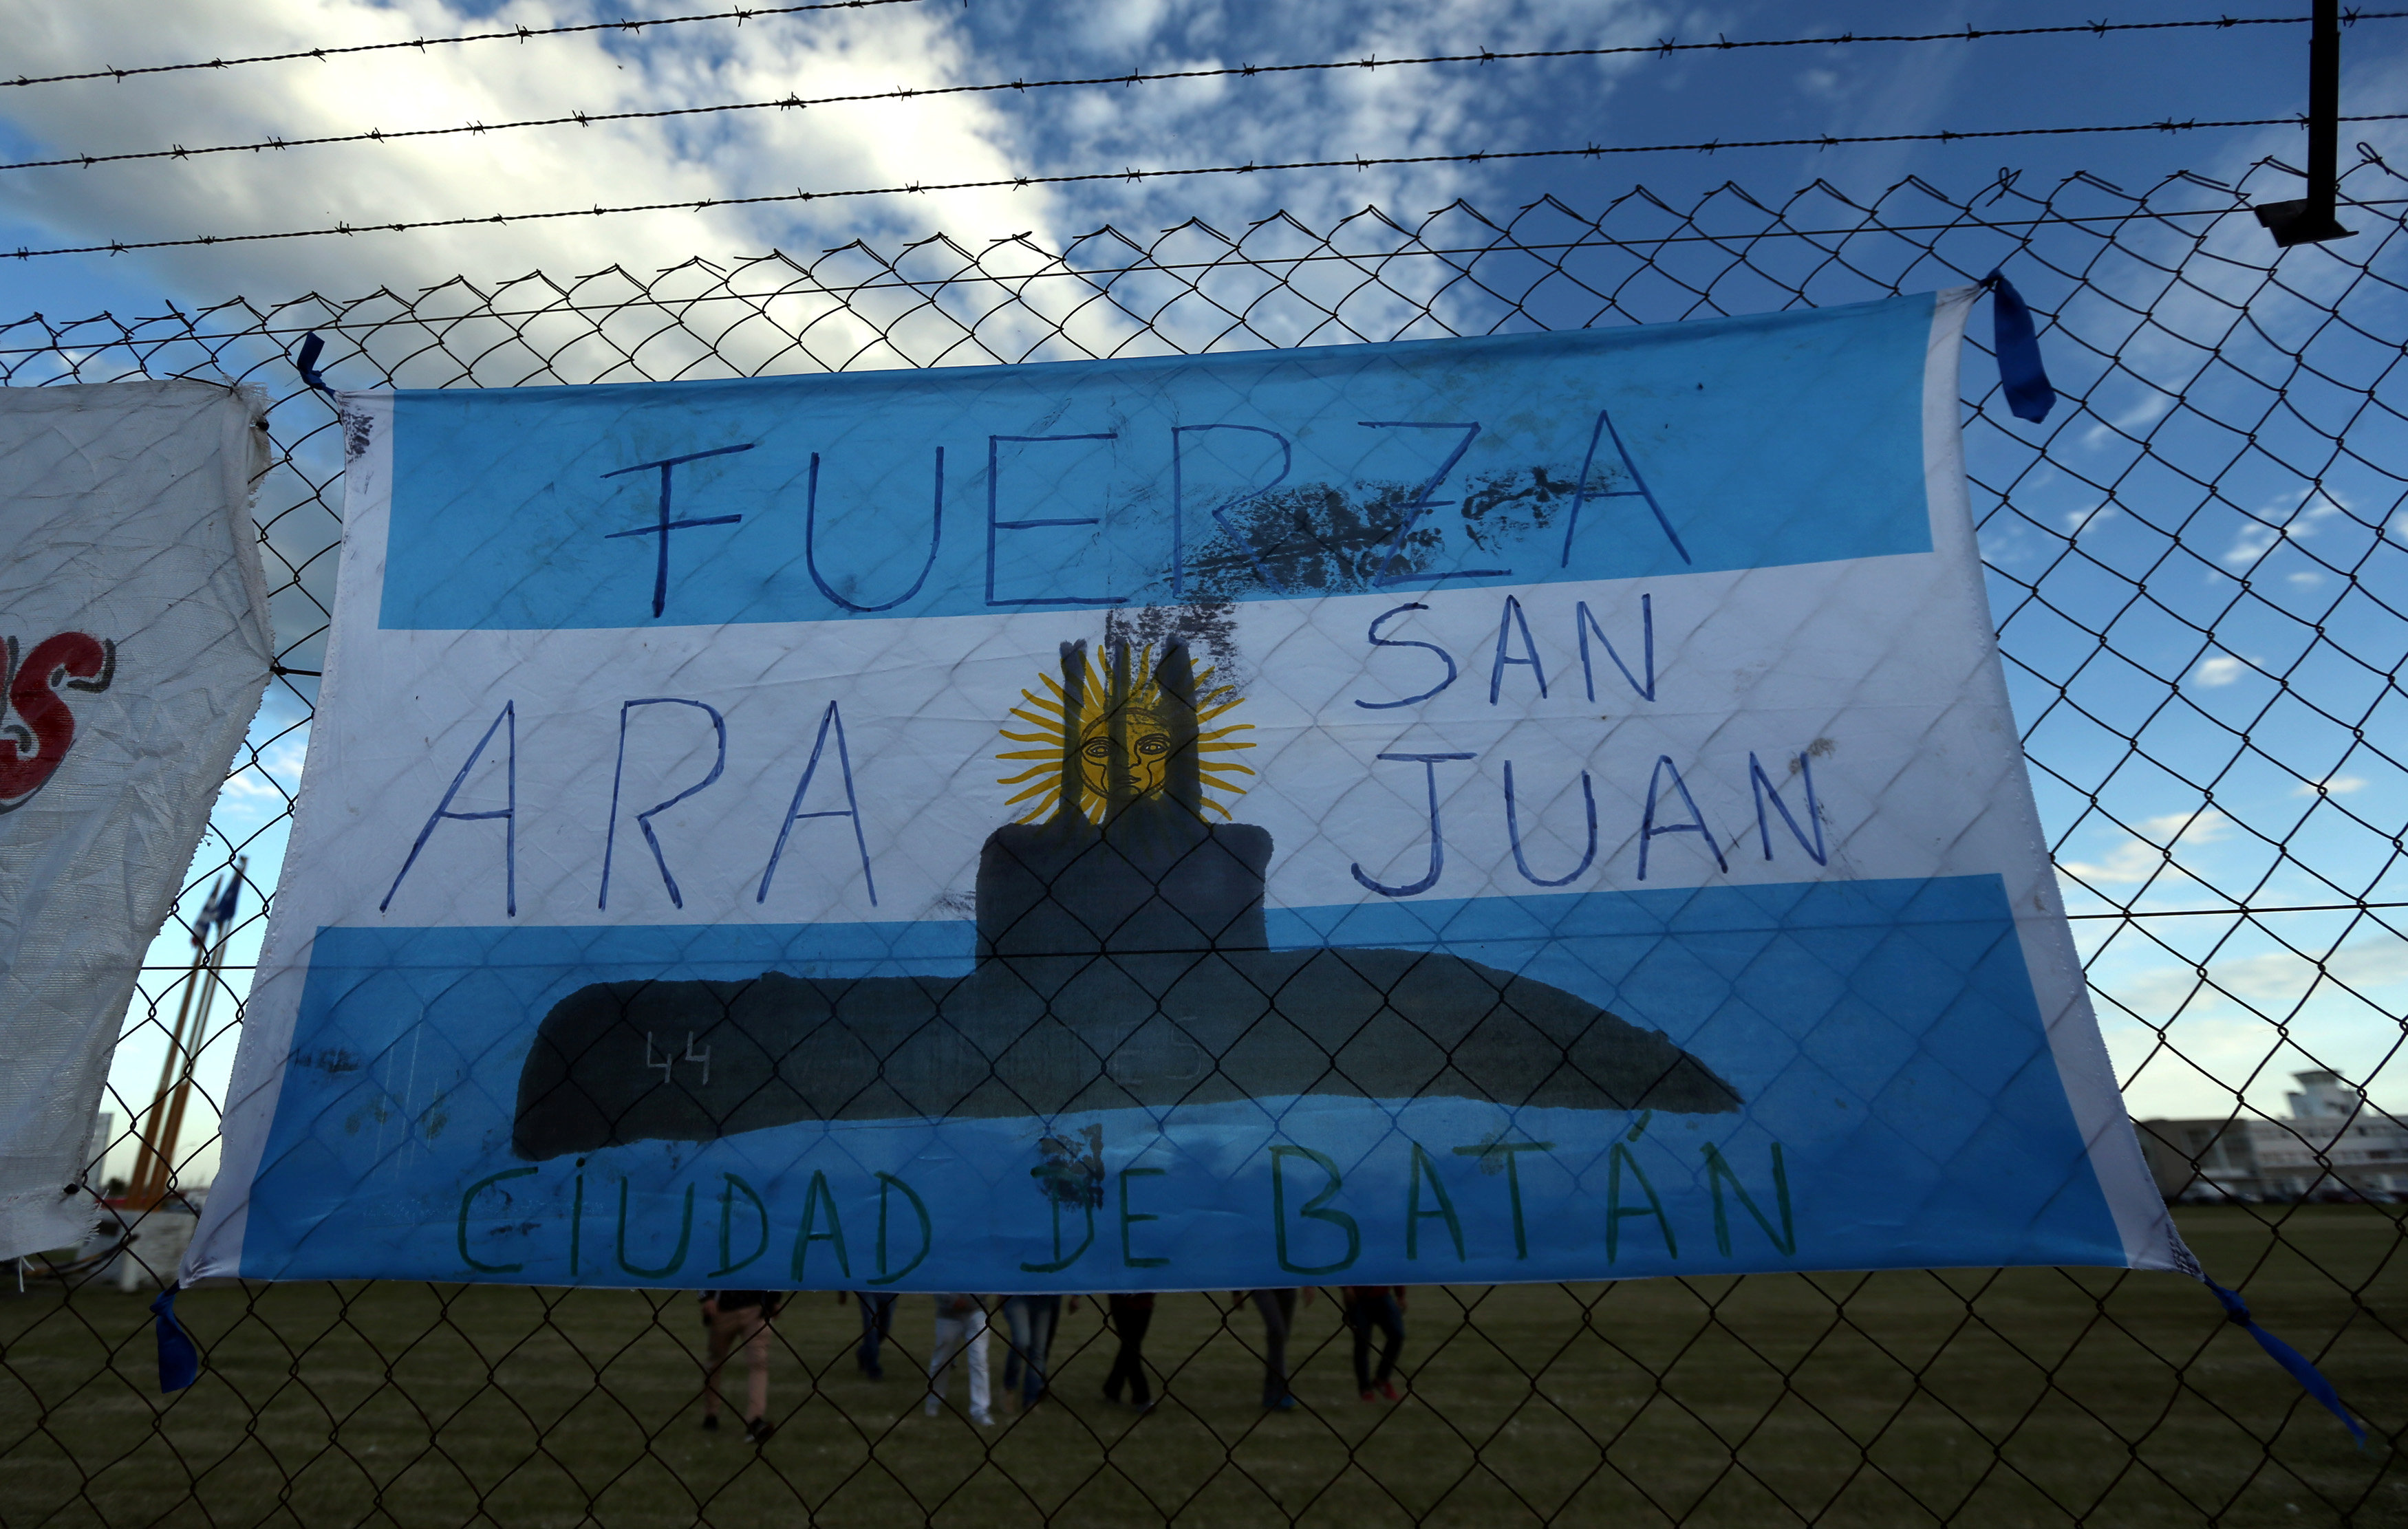 People walk behind an Argentine national flag displayed on a fence in Mar del Plata, Argentina, Nov. 22, 2017. The words on the flag read: 